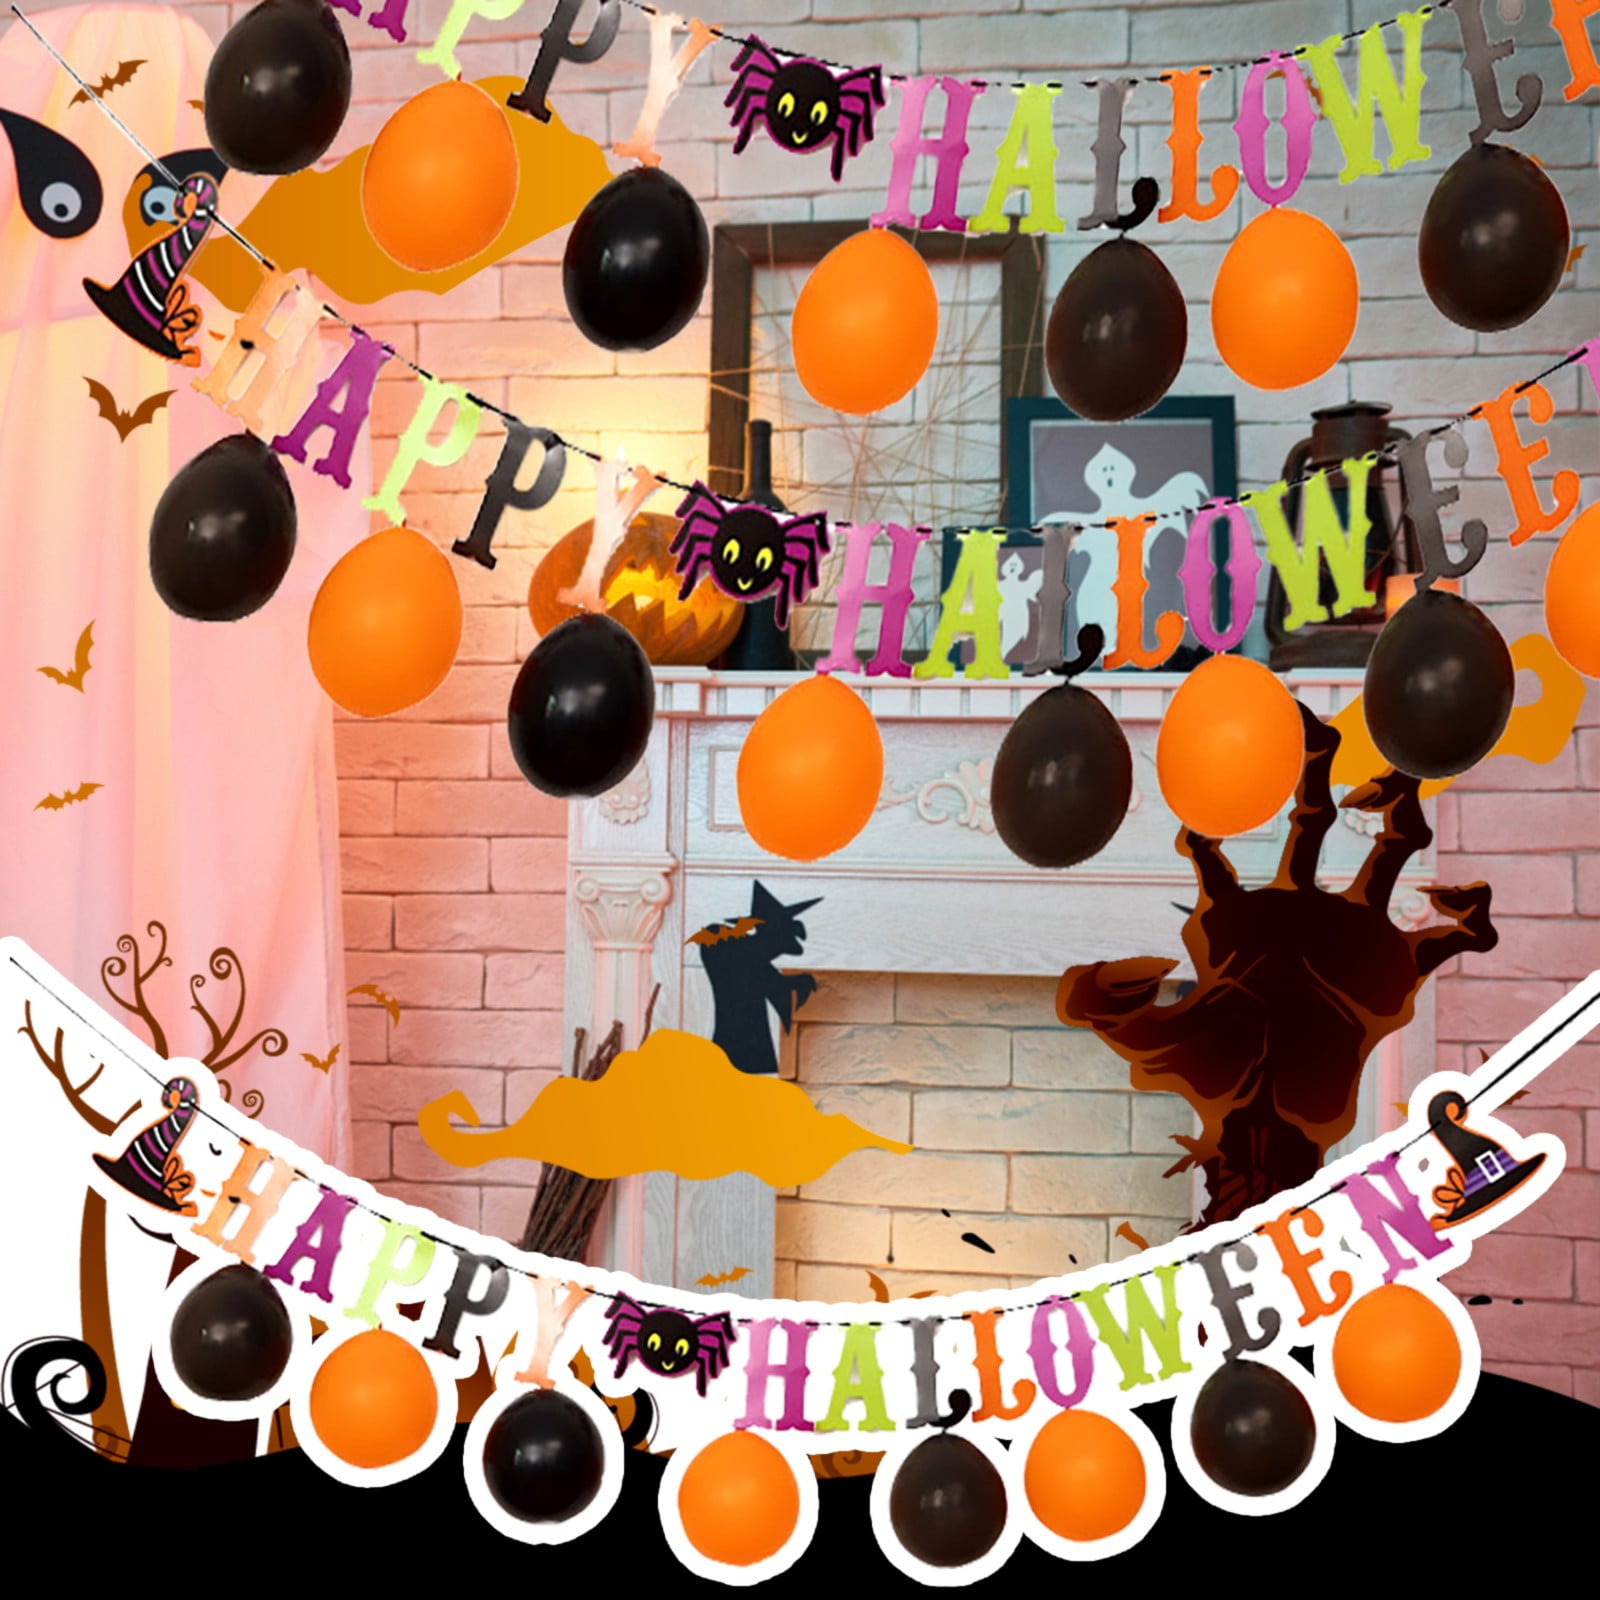 Halloween Letter Balloon Cartoon Party Decoration Kindergarten Halloween  Party Balloons Halloween Theme Party Decorations Set Orange Black Balloon  About 137 Inches When Unfolded - Walmart.com